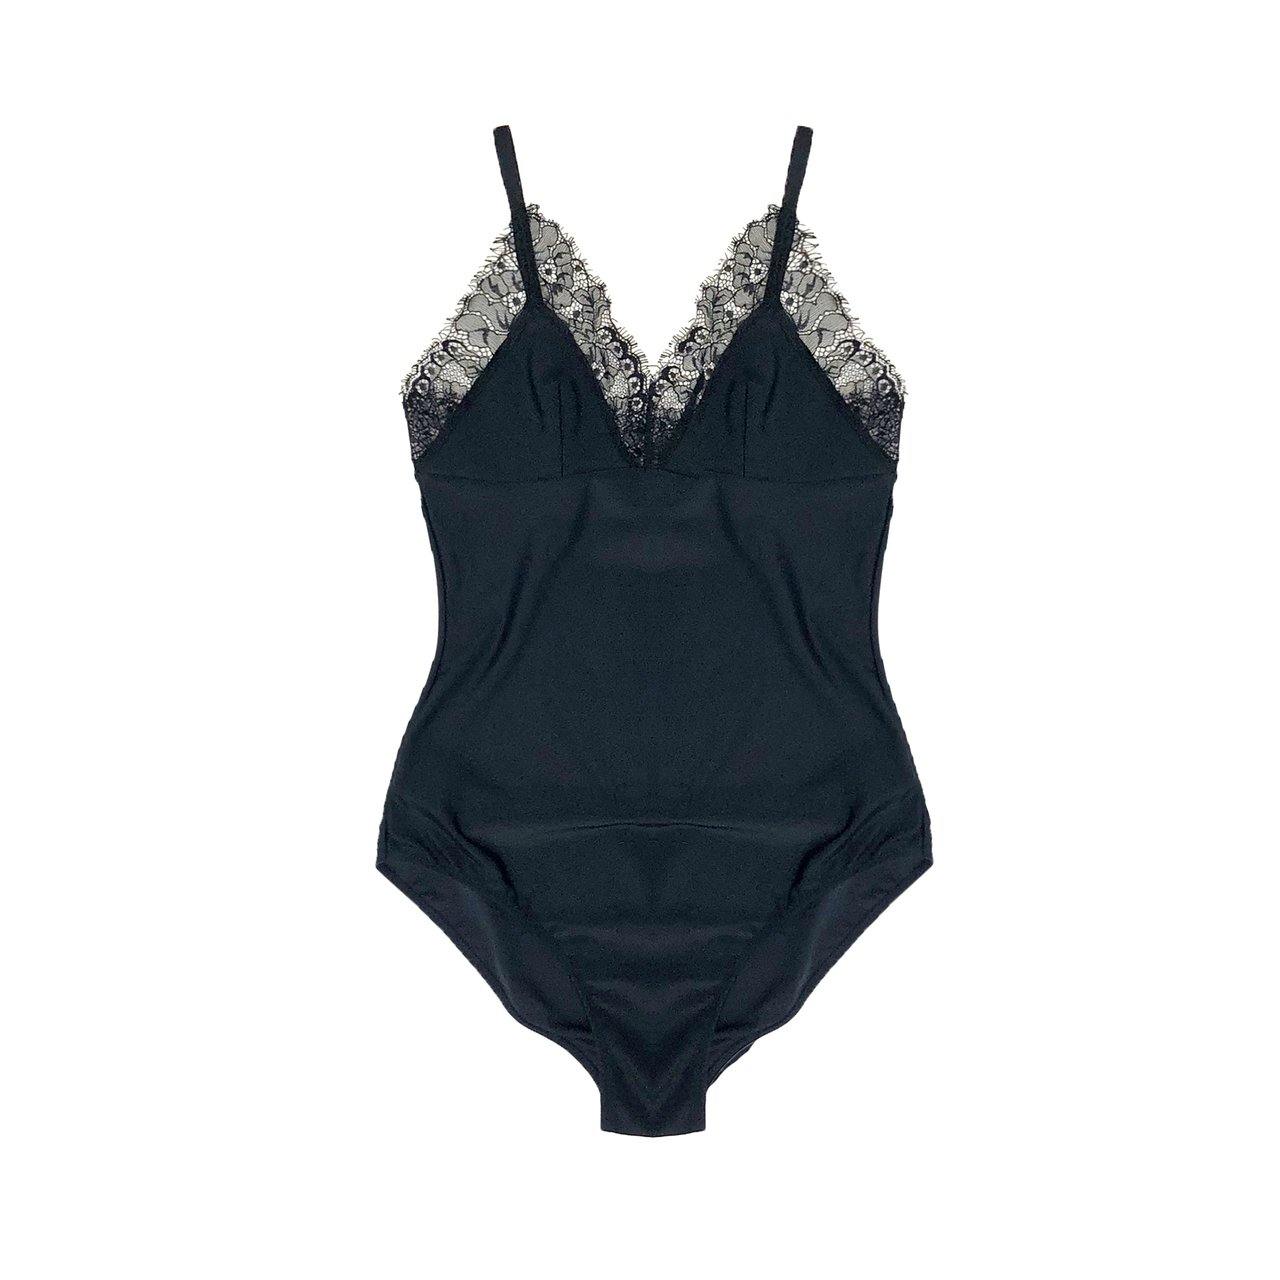 the black pearl lace swimsuit/bodysuit - Our Bralette Club